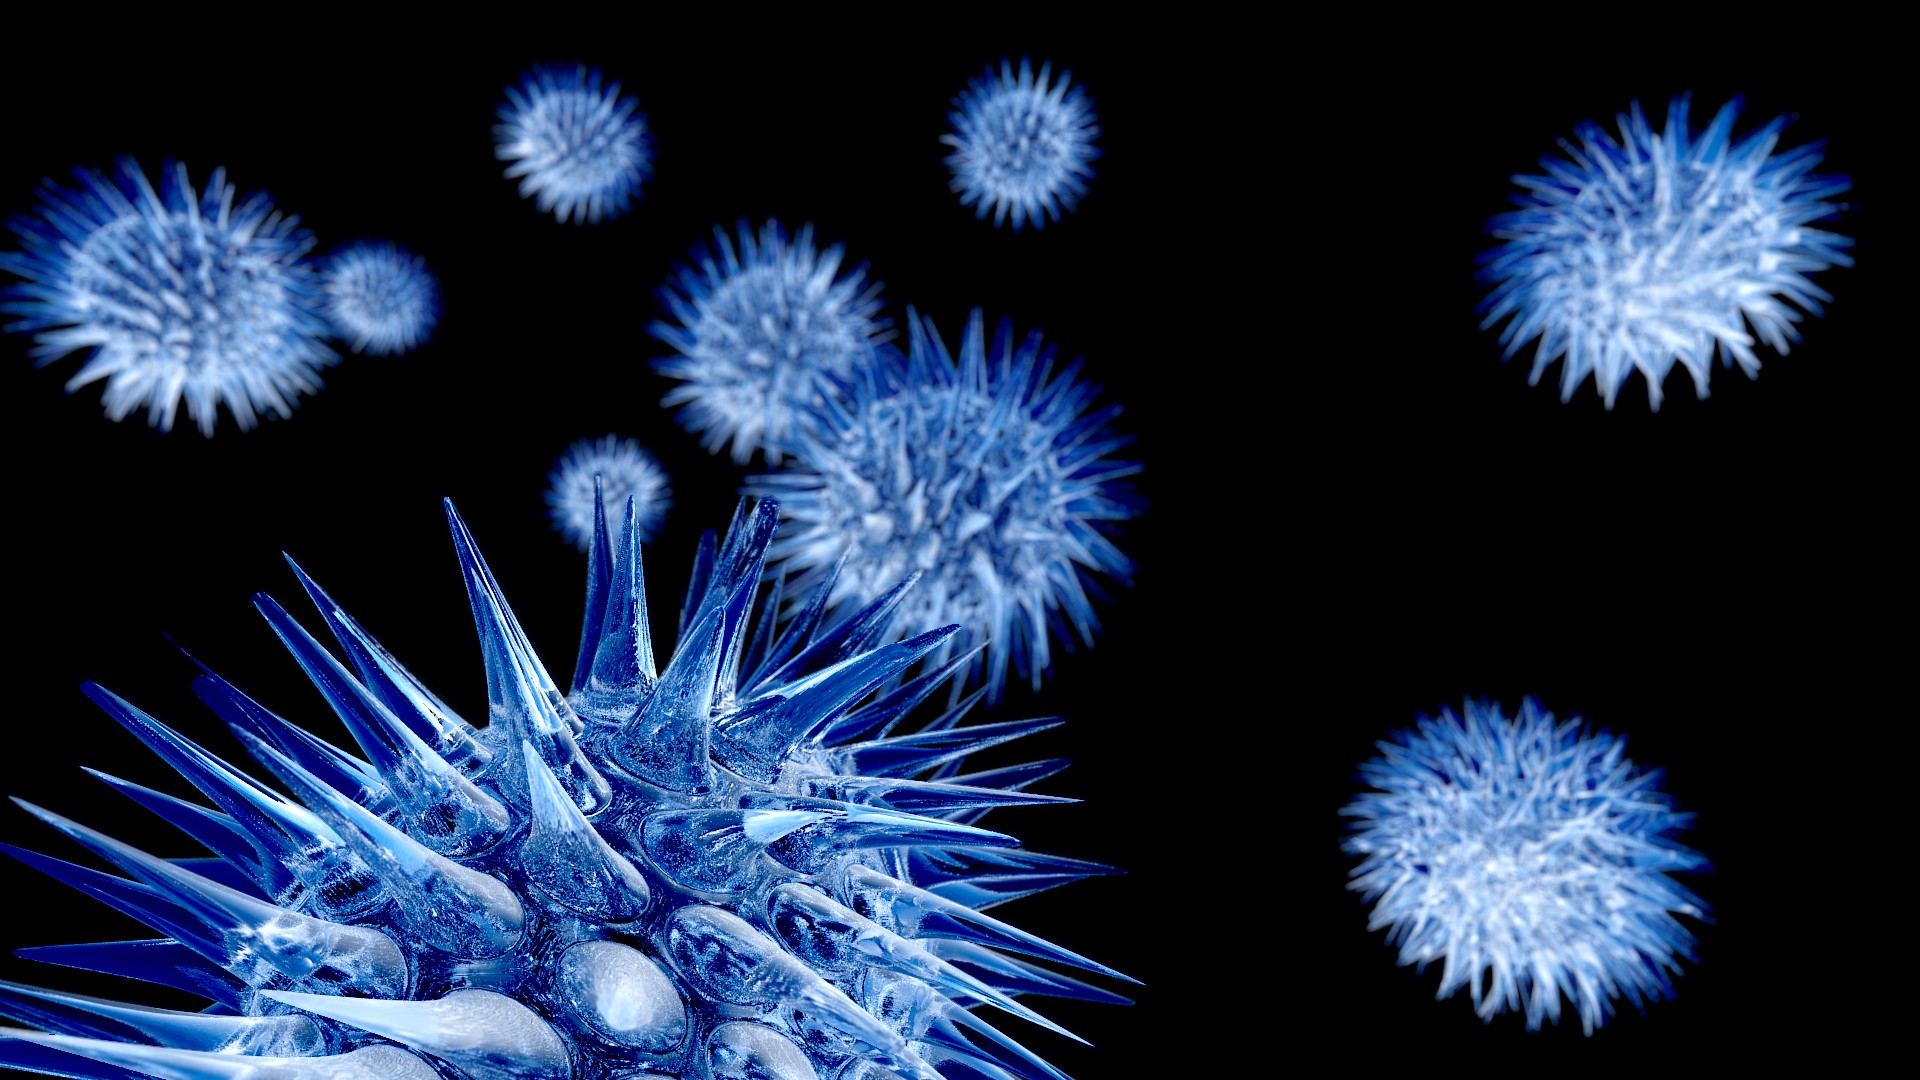 Winter viruses are spiking in summer post-Covid-19, says study